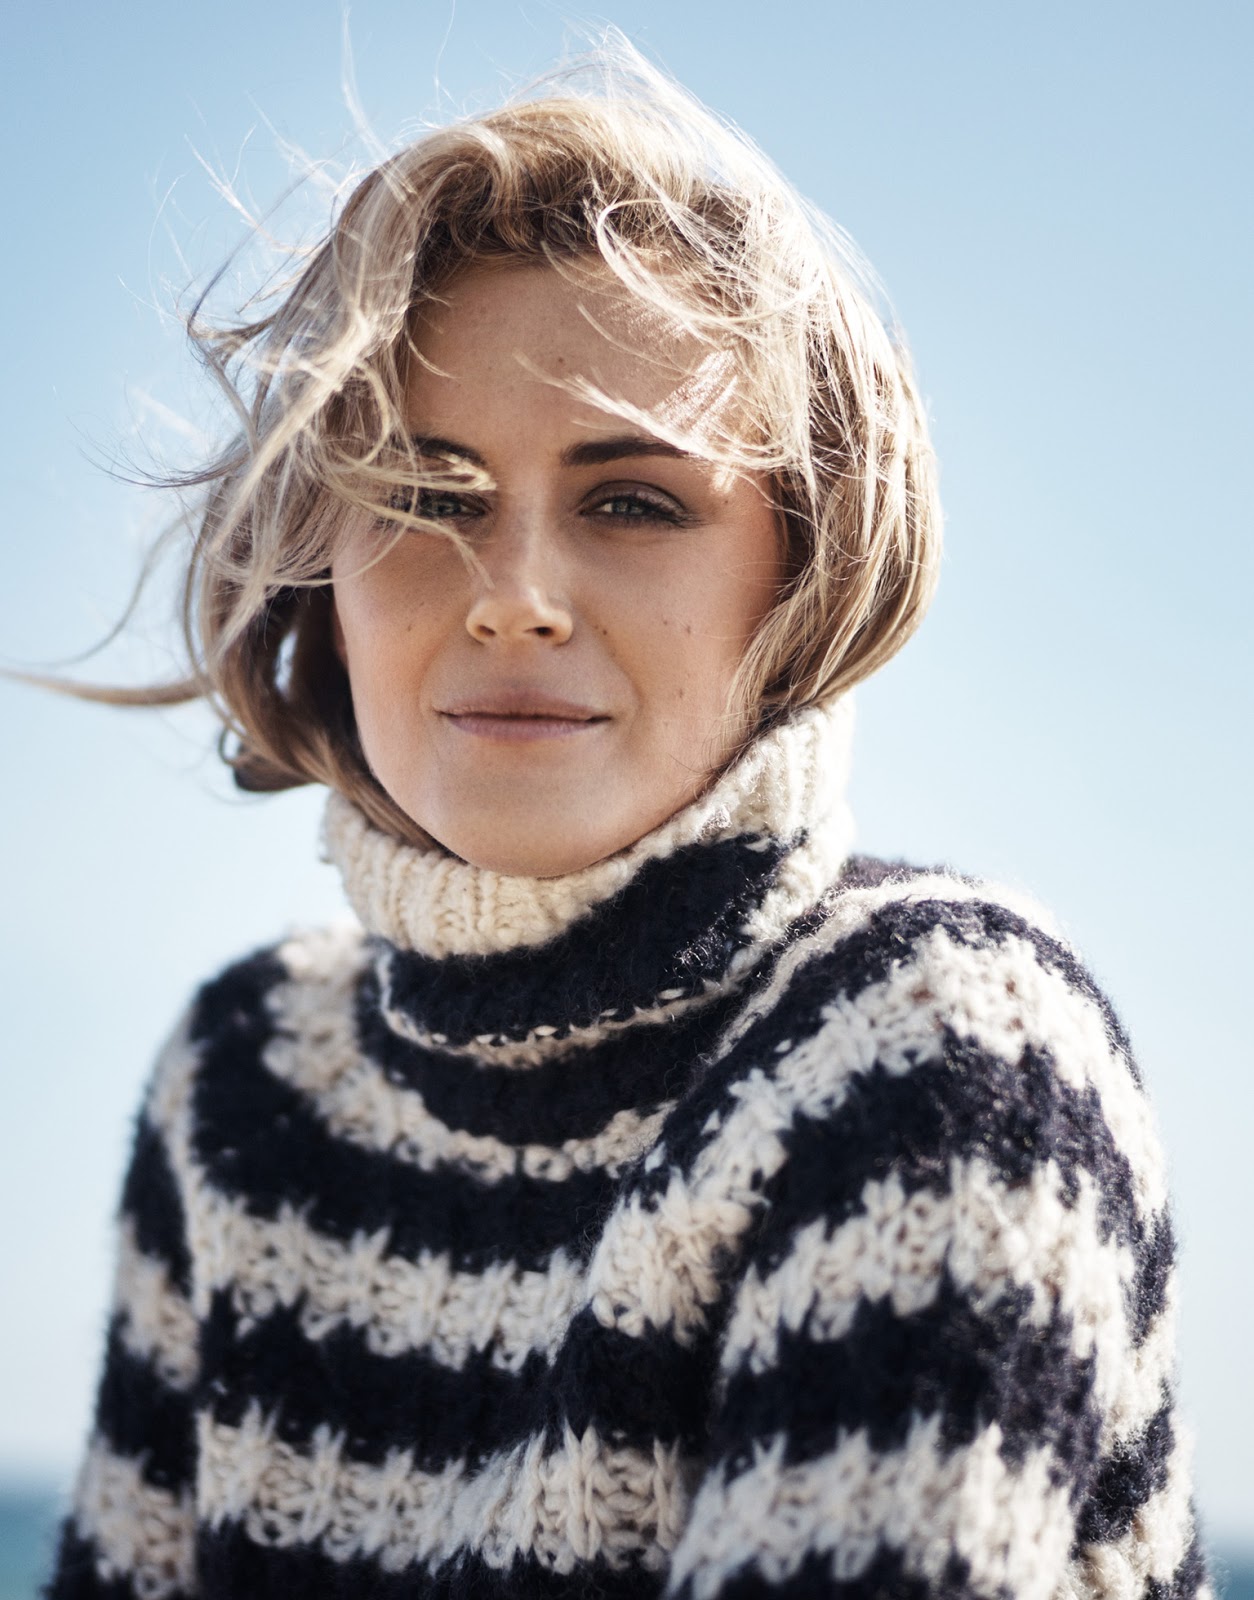 Taylor Schilling in The Edit Magazine June 25th, 2015 by Steven Pan